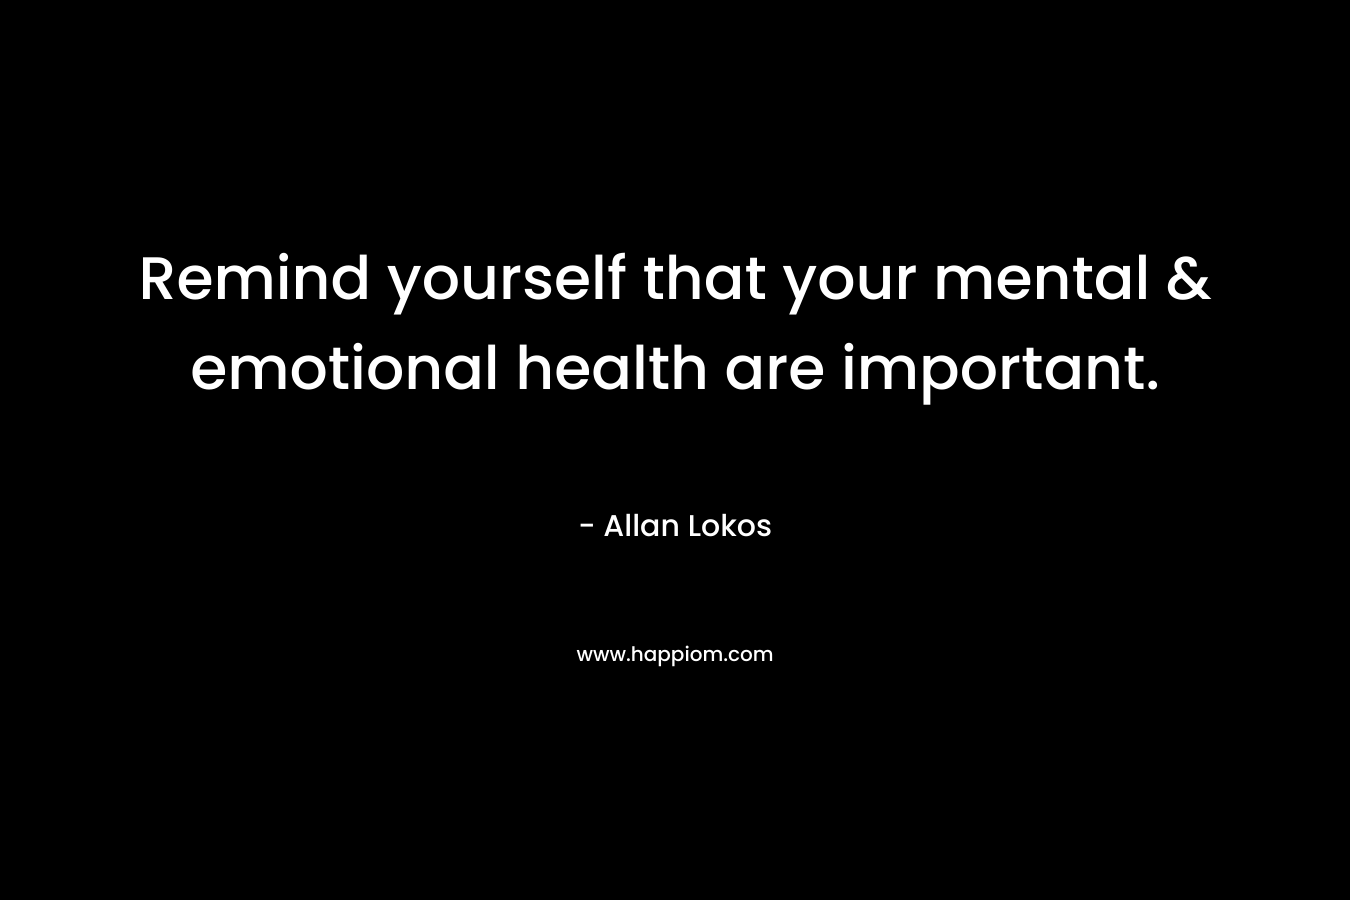 Remind yourself that your mental & emotional health are important.